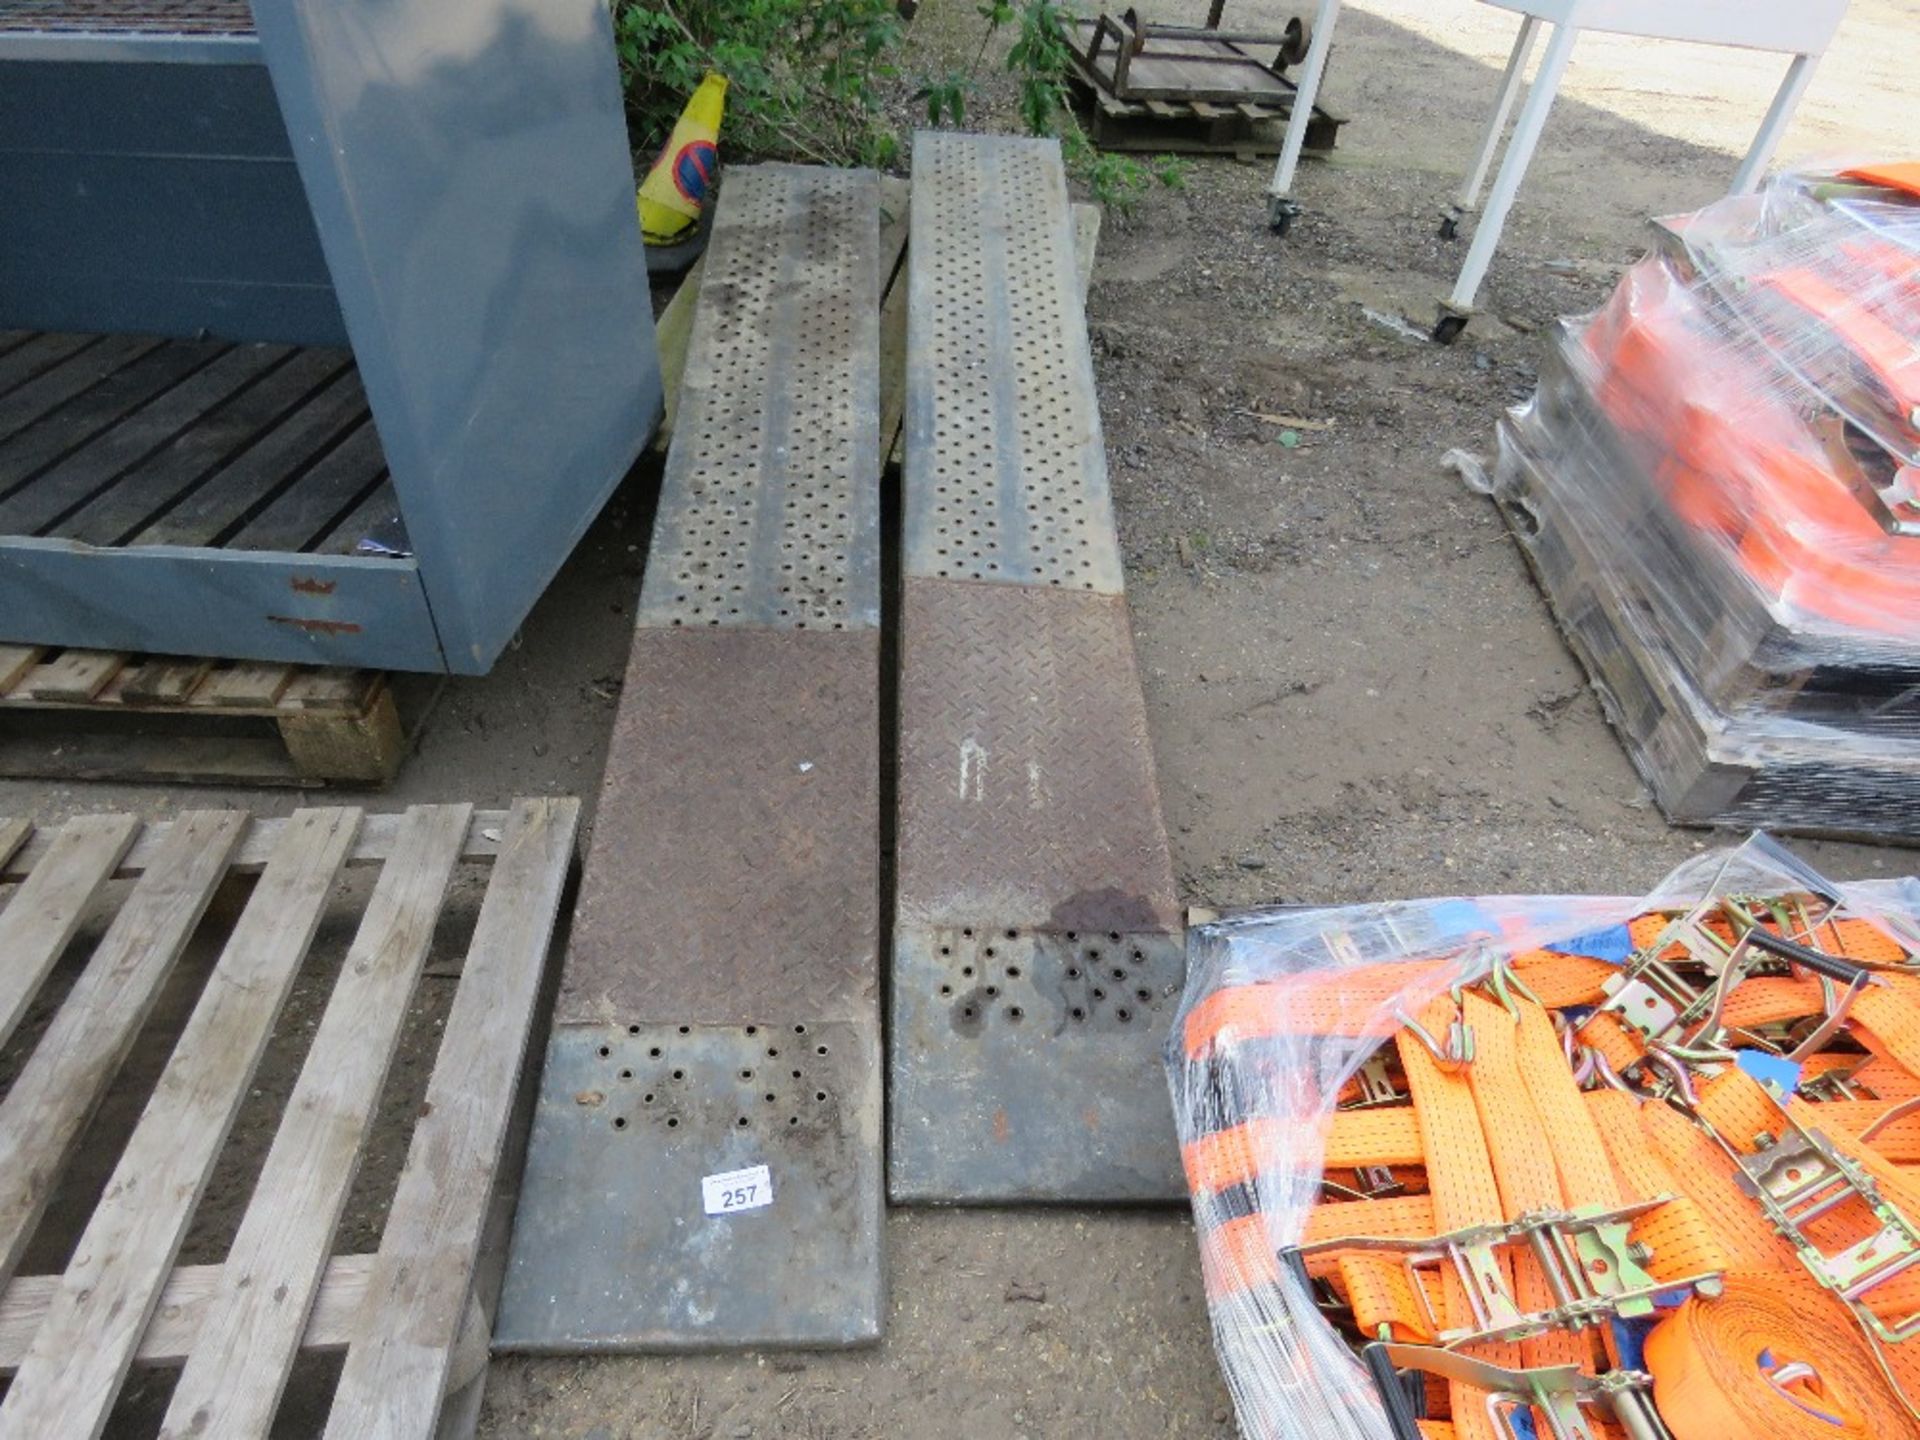 PAIR OF STEEL LOADING RAMPS 8FT LENGTH APPROX.